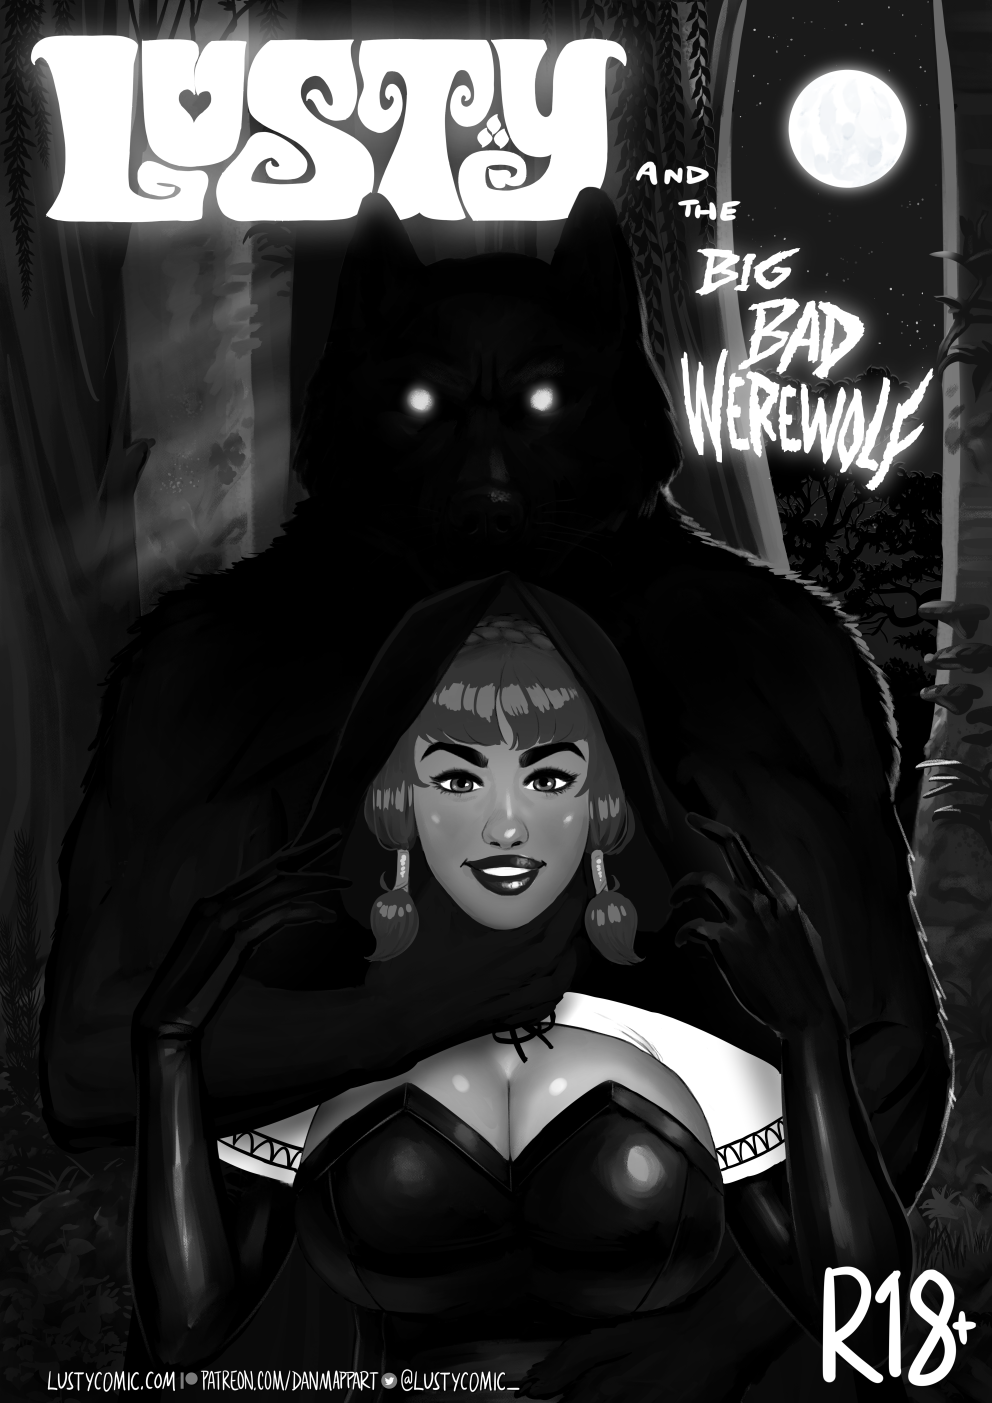 It's a comic cover! The text reads "LUSTY and the BIG BAD WEREWOLF". The illustration is in greyscale, reminiscent of a golden age horror film. Lusty, a sexy elf adventurer, is front and centre, wearing a black leather bodice over a white top that shows off her tits, and a black cloak with a hood. She's in a dark forest, and moonlight shines between the trees. Right behind her is a ghastly black-haired werewolf, who towers one head higher than her. He is muscular, has wide shoulders, and his eyes glow fearsomely. One of his clawed hands closes around Lusty's throat. But she is not afraid~